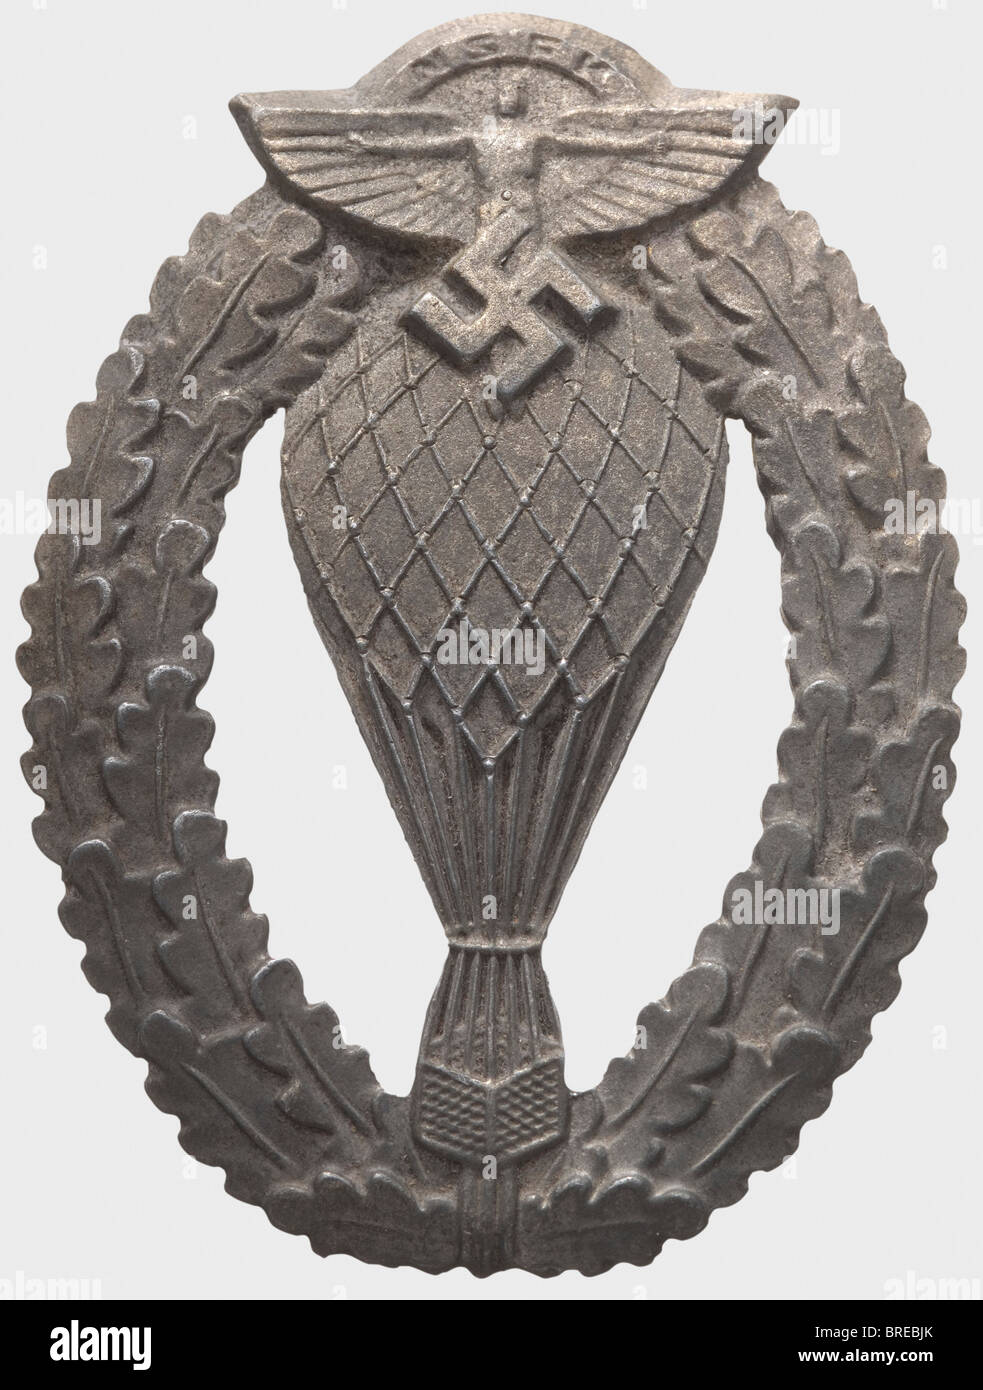 A NSFK Badge for Free Balloon Pilots, issue with winged human figure 1938 - 1945 Fine zinc with vestiges of silvering. Reverse marked '231240', wire attachment pin (OEK 3671). historic, historical, 1930s, 1930s, 20th century, awards, award, German Reich, Third Reich, Nazi era, National Socialism, object, objects, stills, medal, decoration, medals, decorations, clipping, cut out, cut-out, cut-outs, honor, honour, National Socialist, Nazi, Nazi period, symbol, symbols, emblem, emblems, insignia, Stock Photo